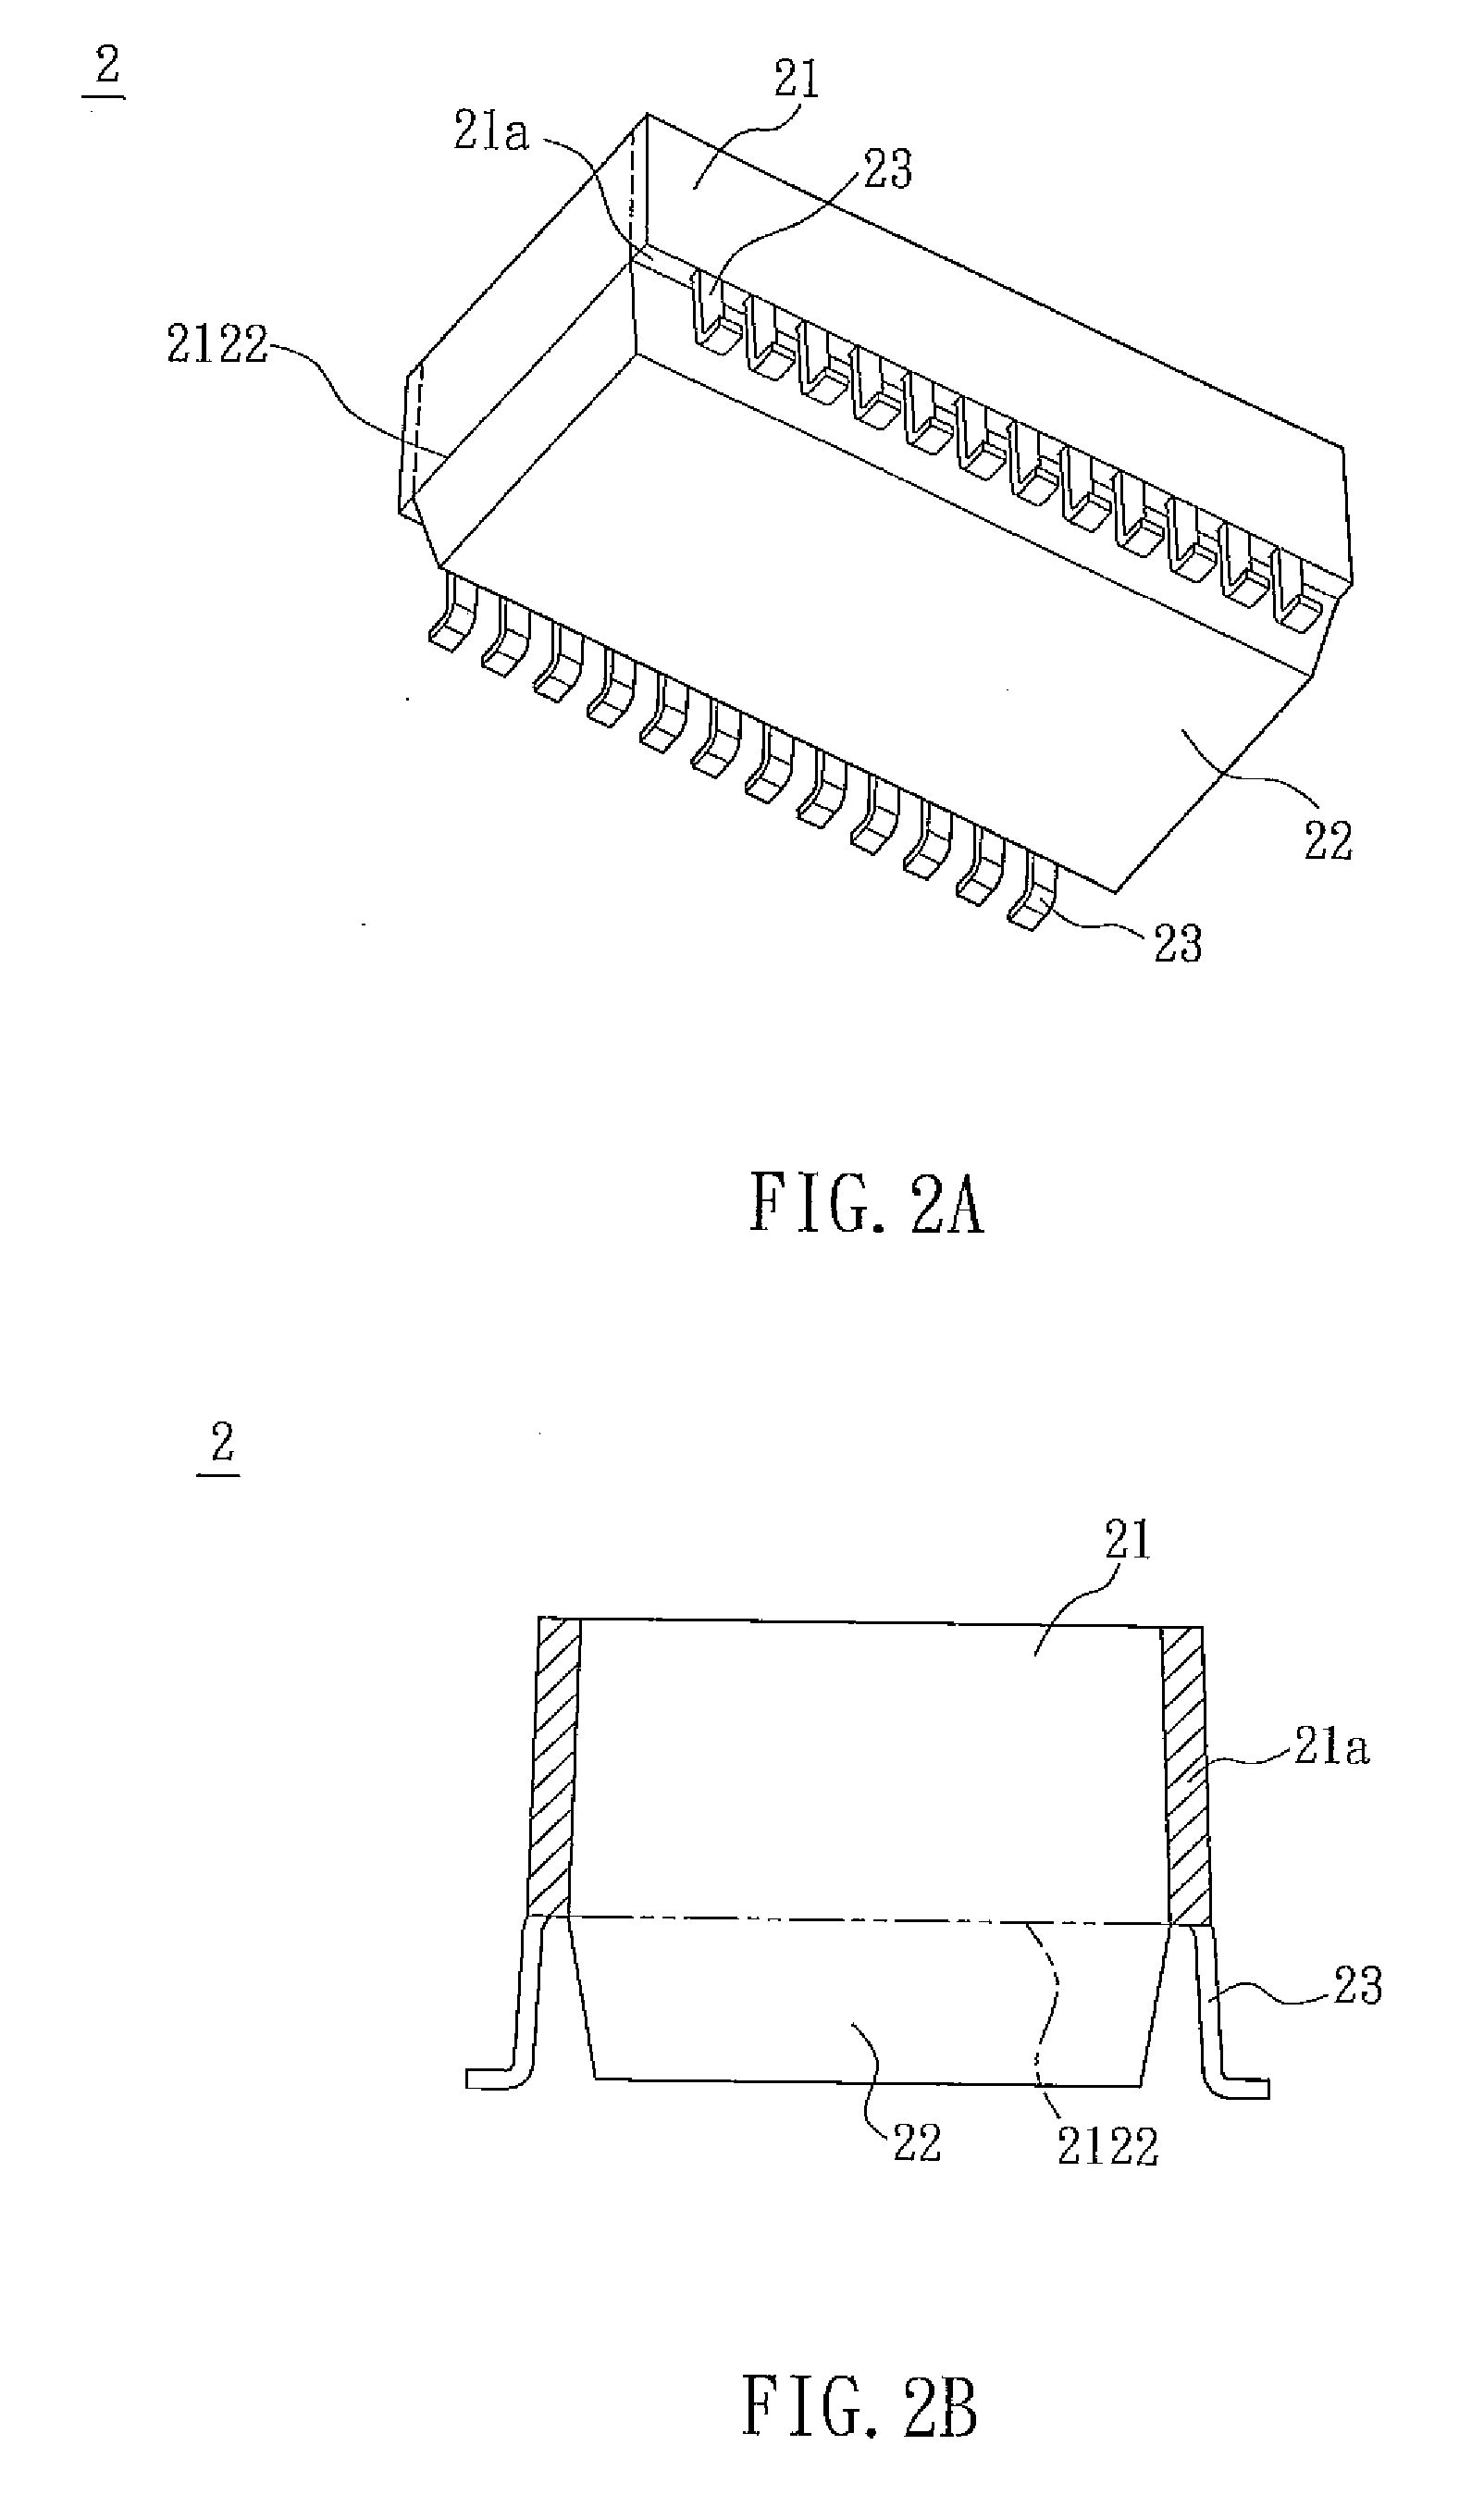 Package structure for lead-free process